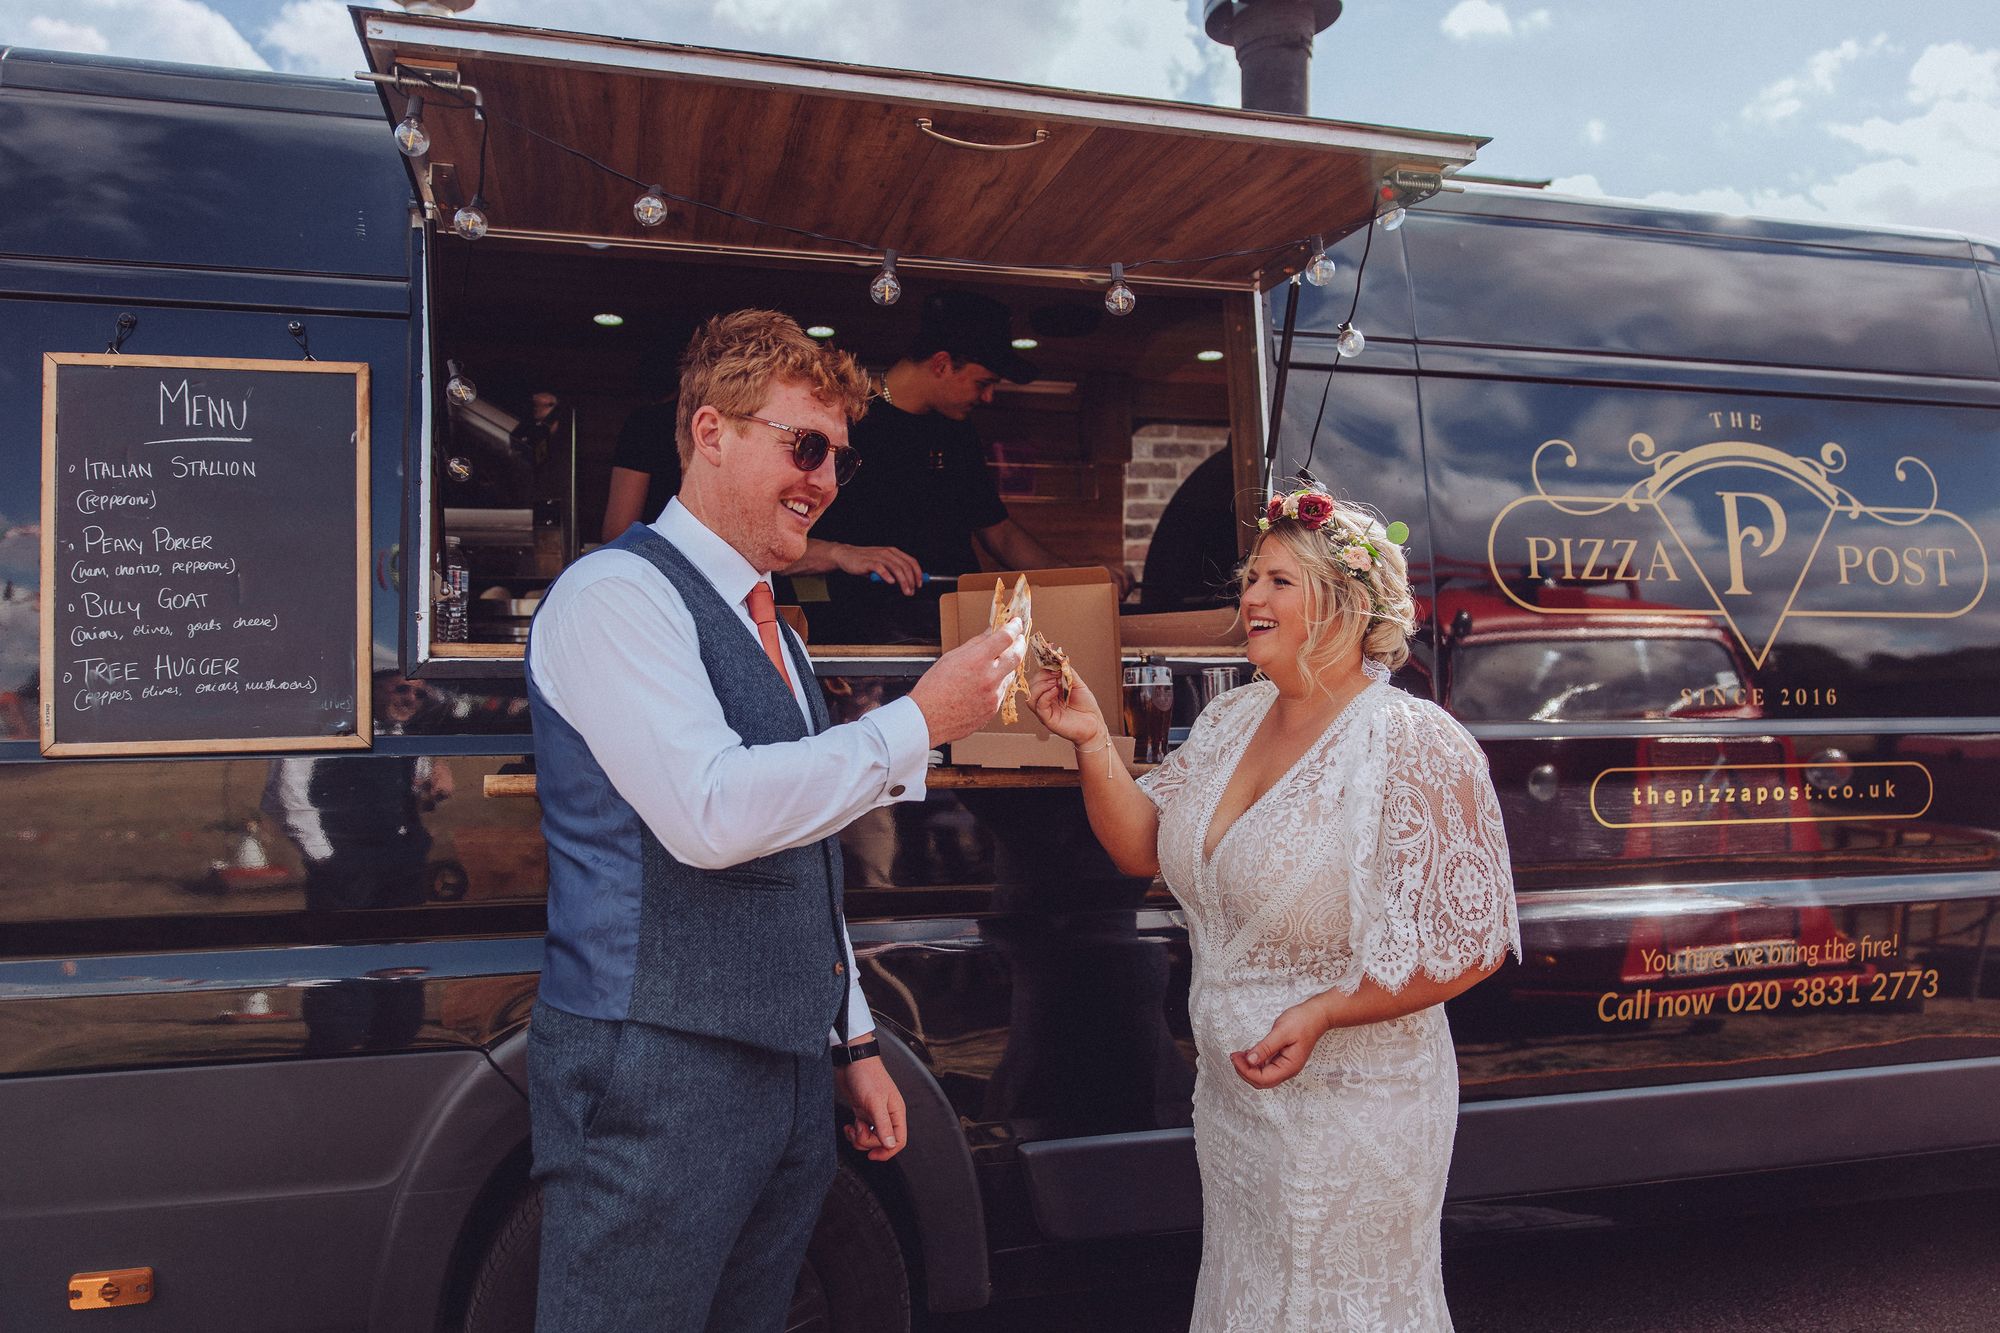 Nor and Dan celebrating their wedding with a slice of pizza 'toast' in front of Pizza Post van - cheers! Photo thanks to Fordtography.